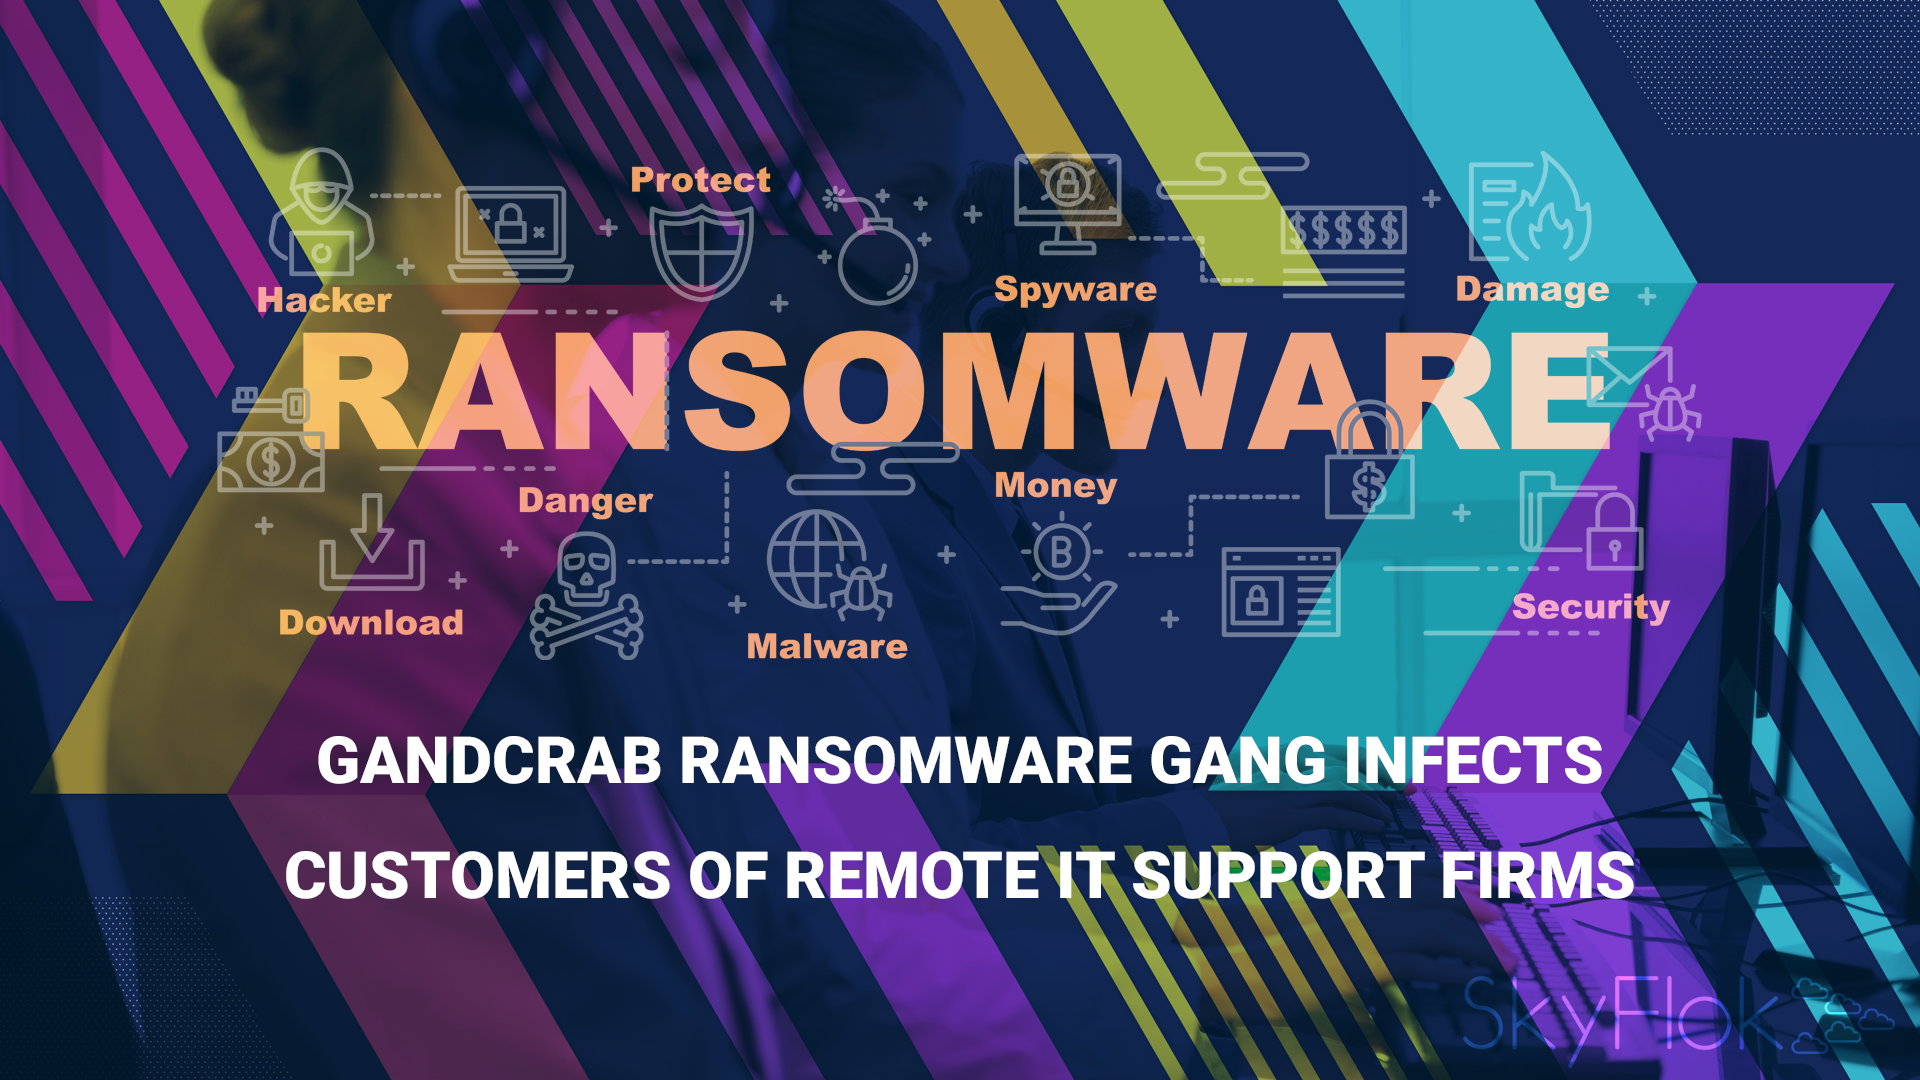 GandCrab ransomware gang infects customers of remote IT support firms